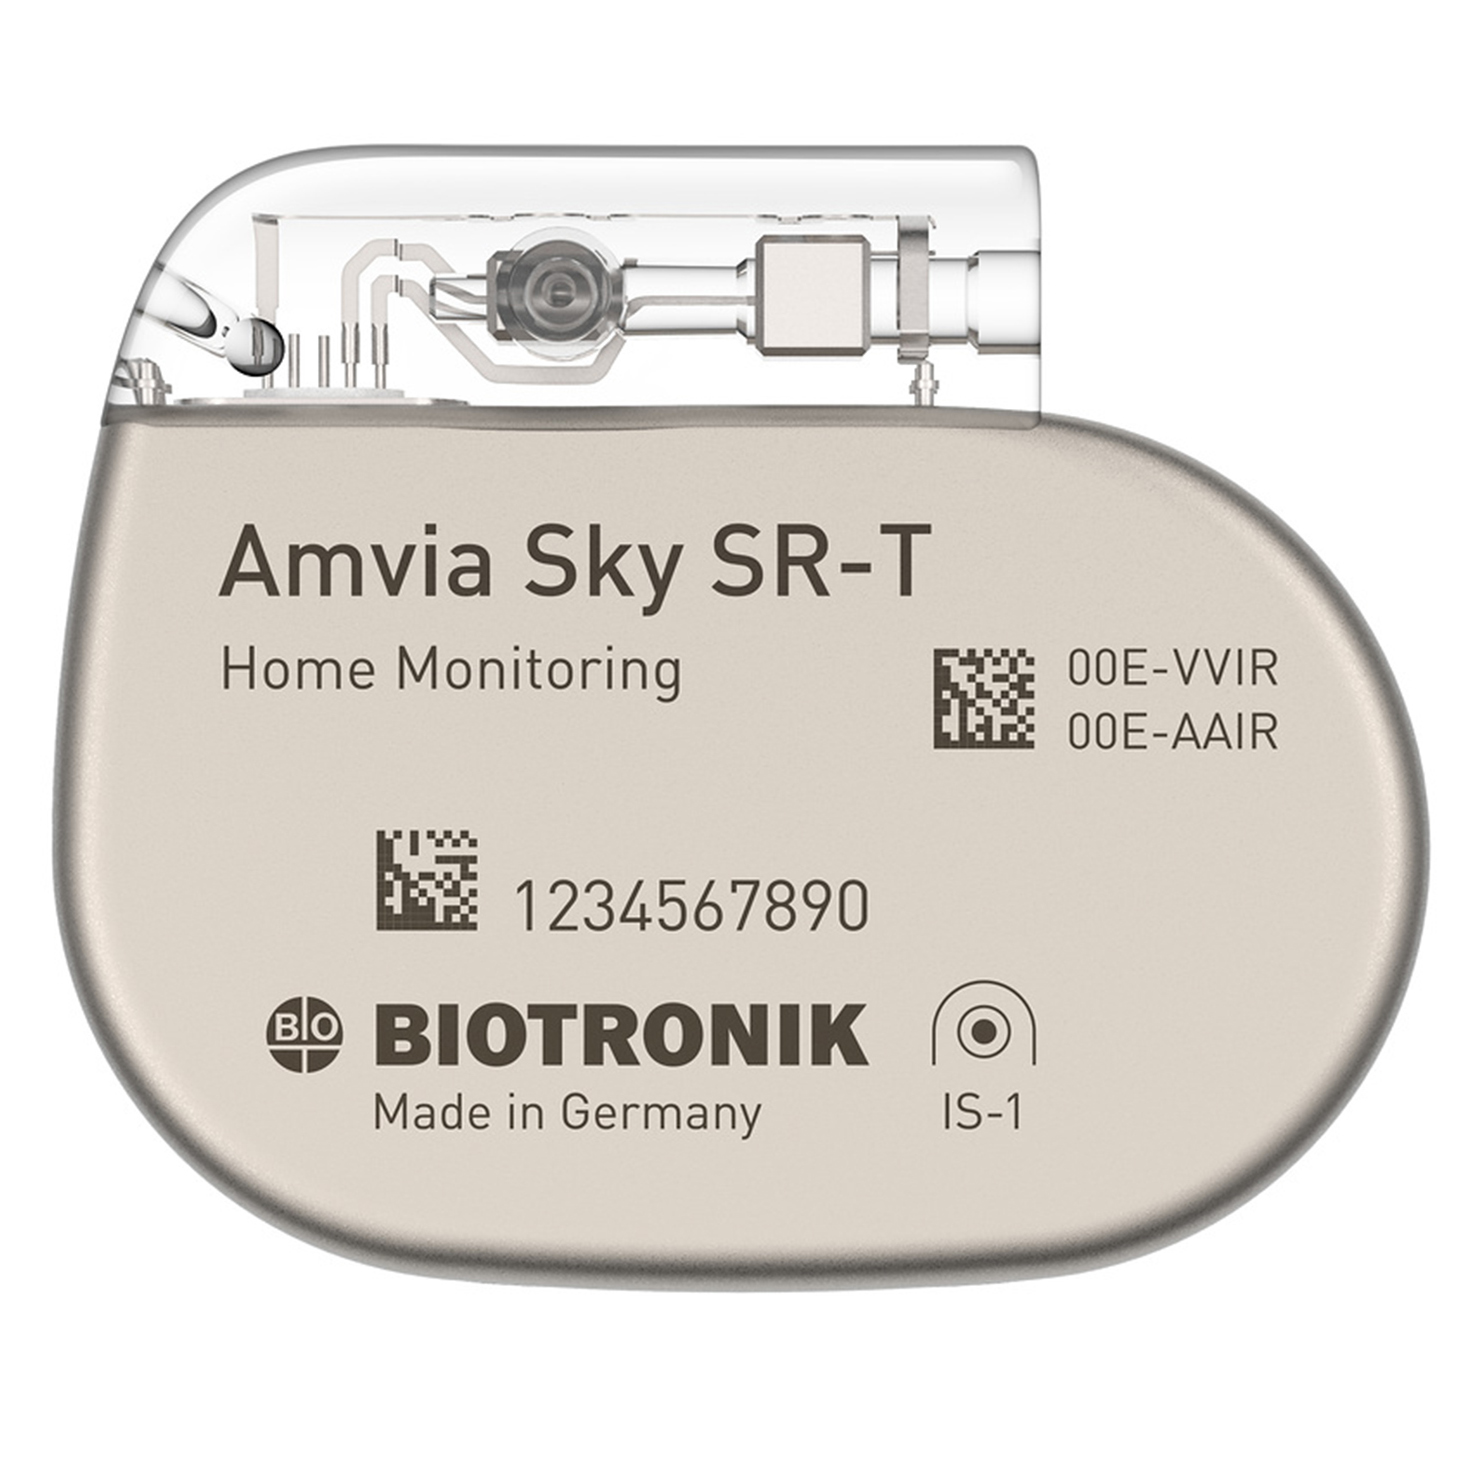 Amvia Sky SR-T single-chamber pacemaker